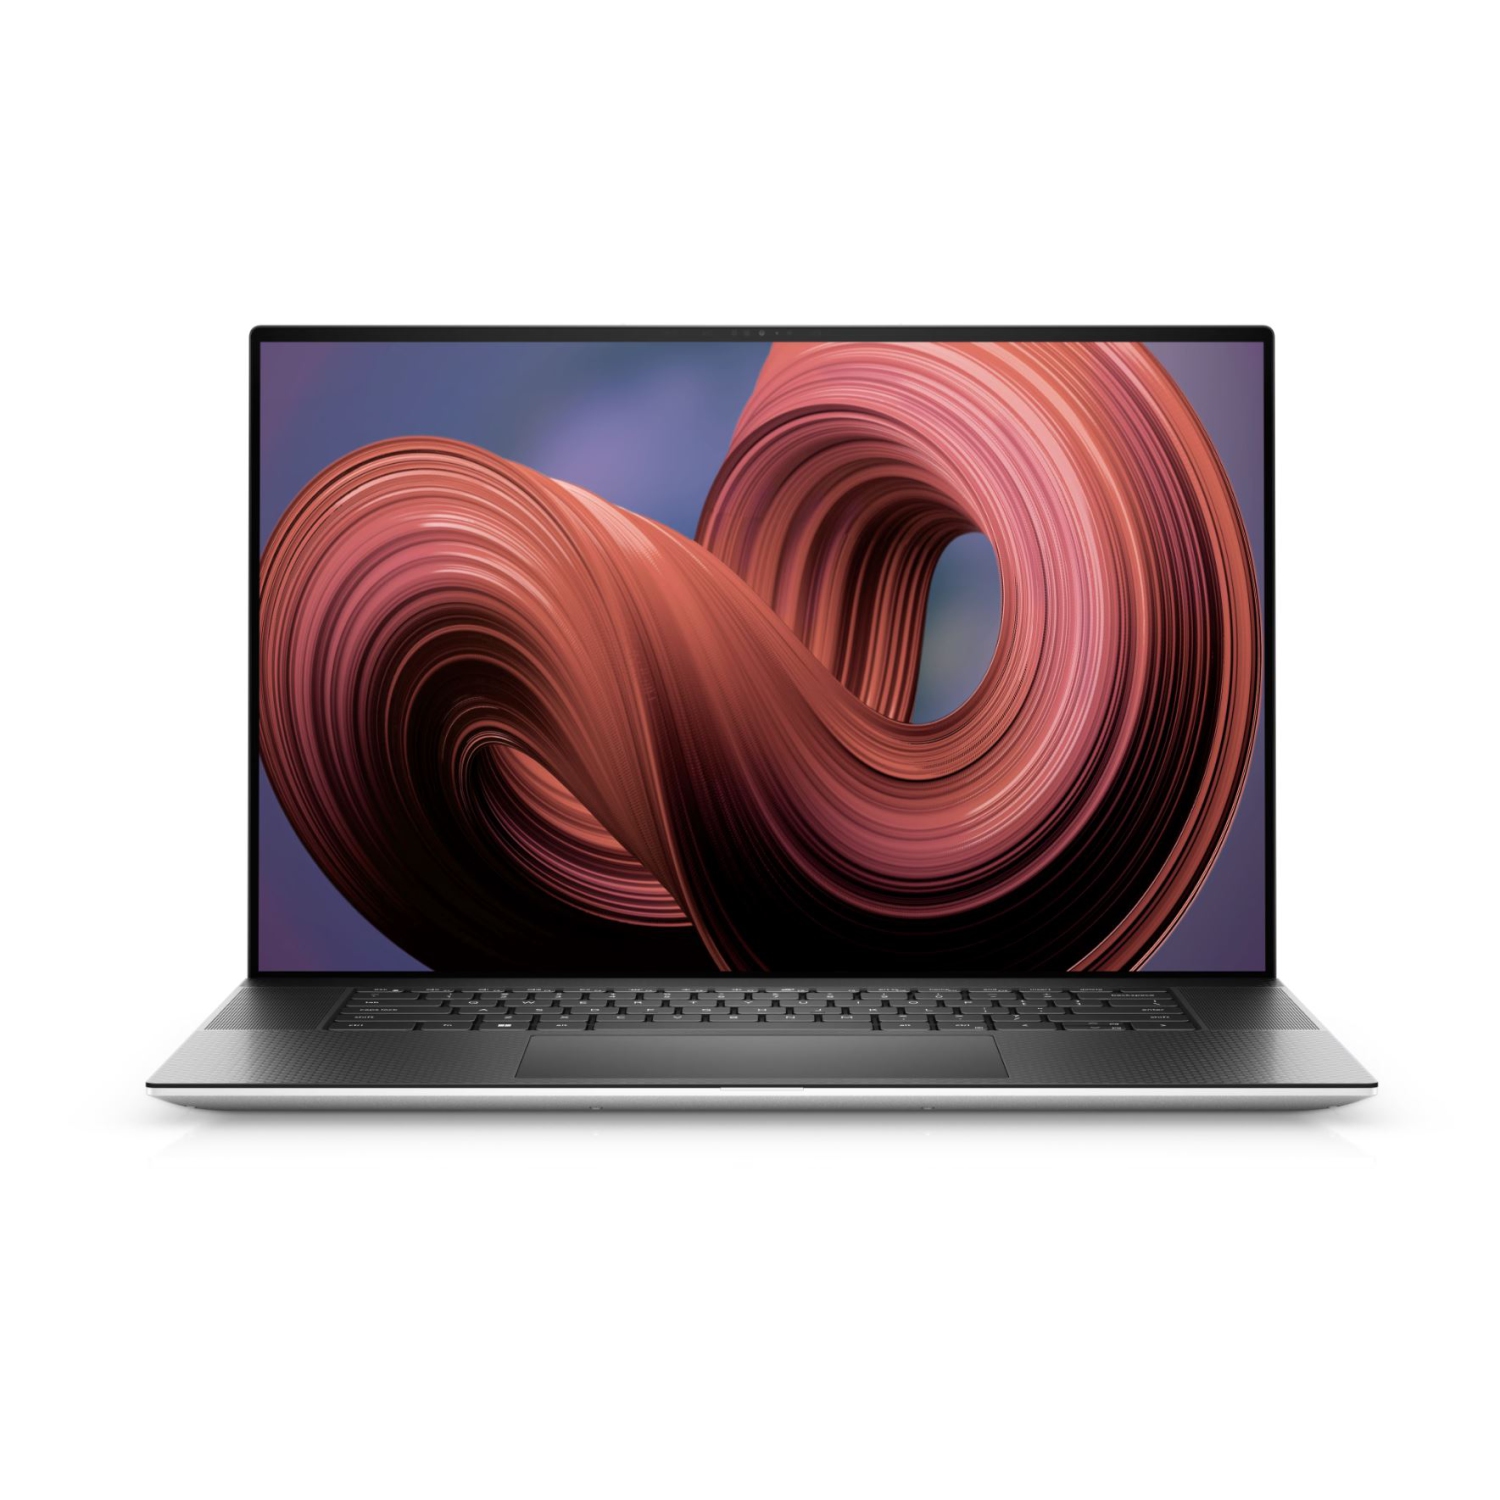 Refurbished (Excellent) Dell XPS 17 9730, 17" UHD Touch, Nvidia RTX 4070, i9-13900H, 32GB RAM, 1TB SSD, WIN 11 Home